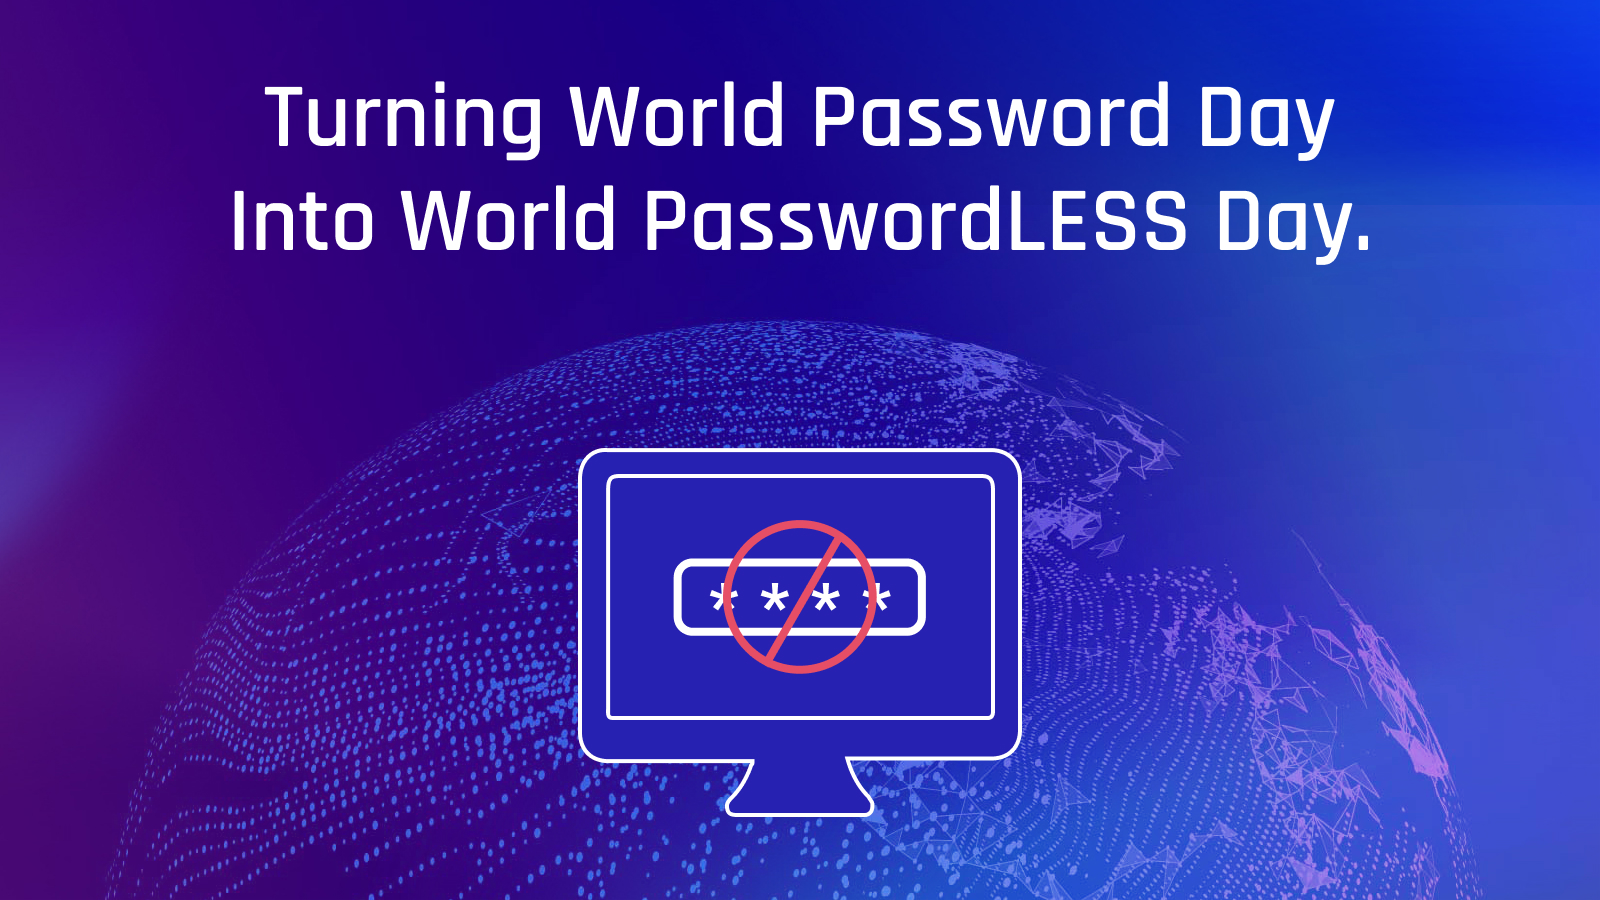 Celebrate World Password Day by Eliminating Passwords